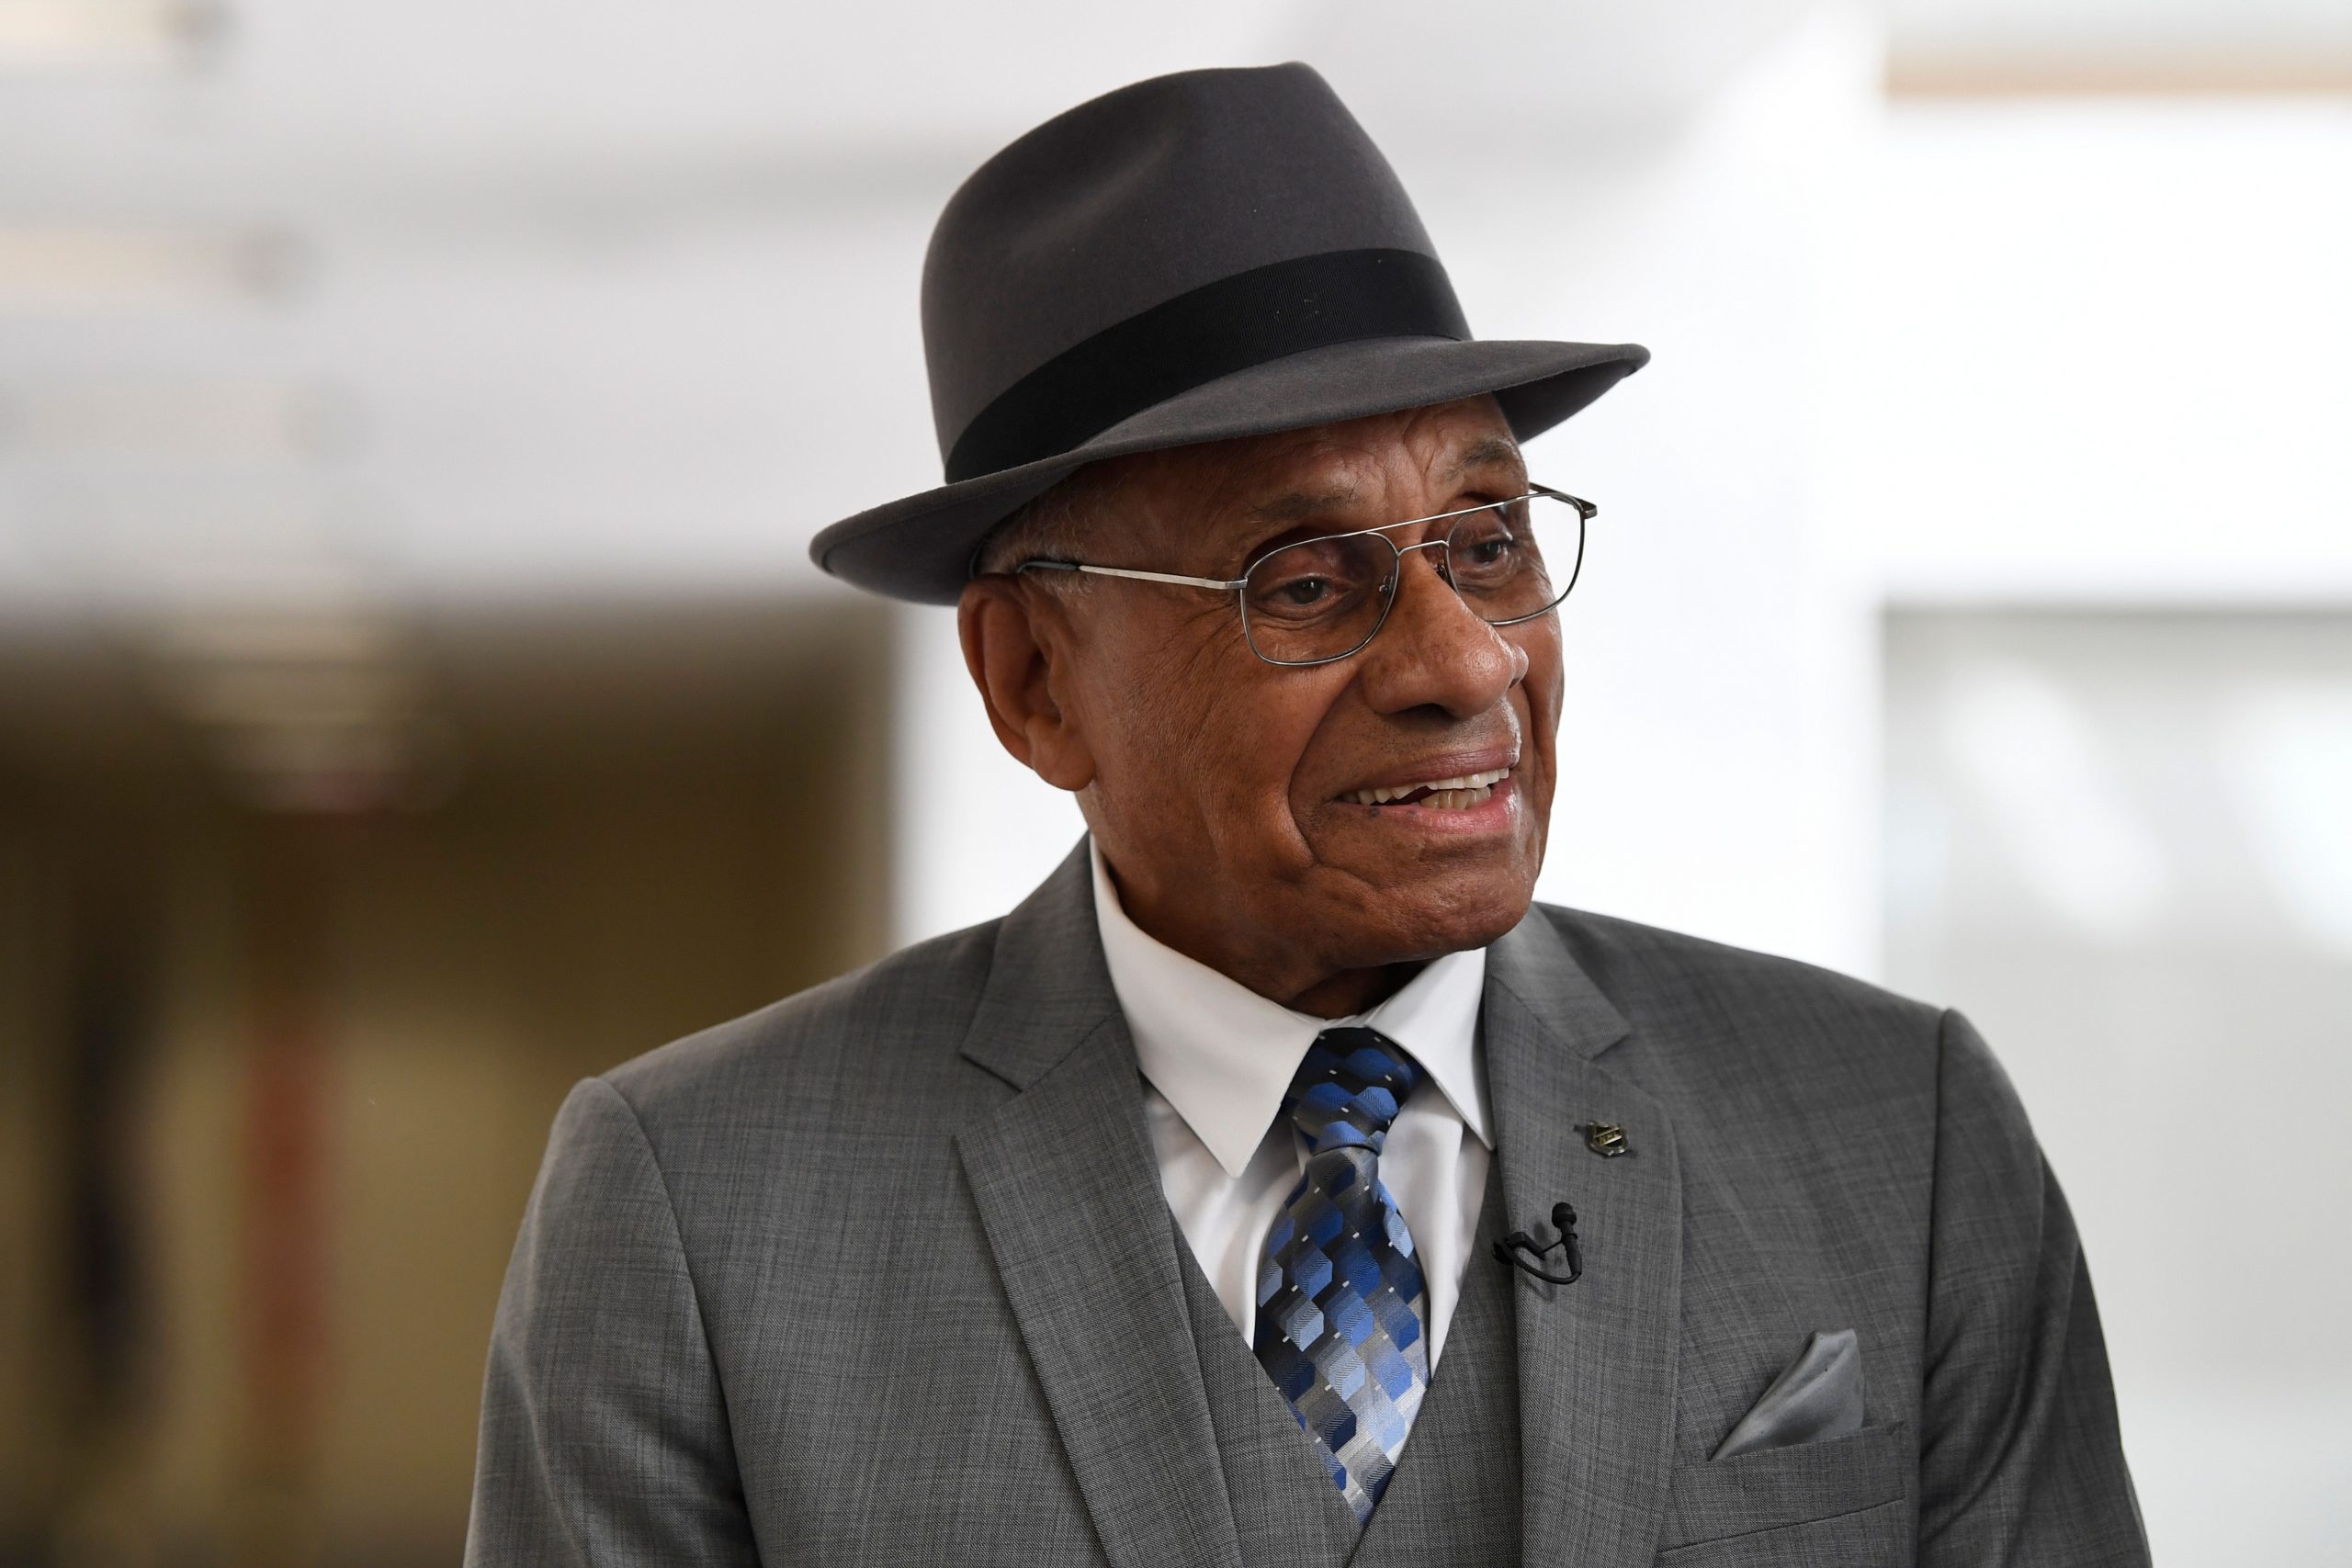 Willie O’Ree, NHL’s first Black player, says having Bruins retire jersey an honour